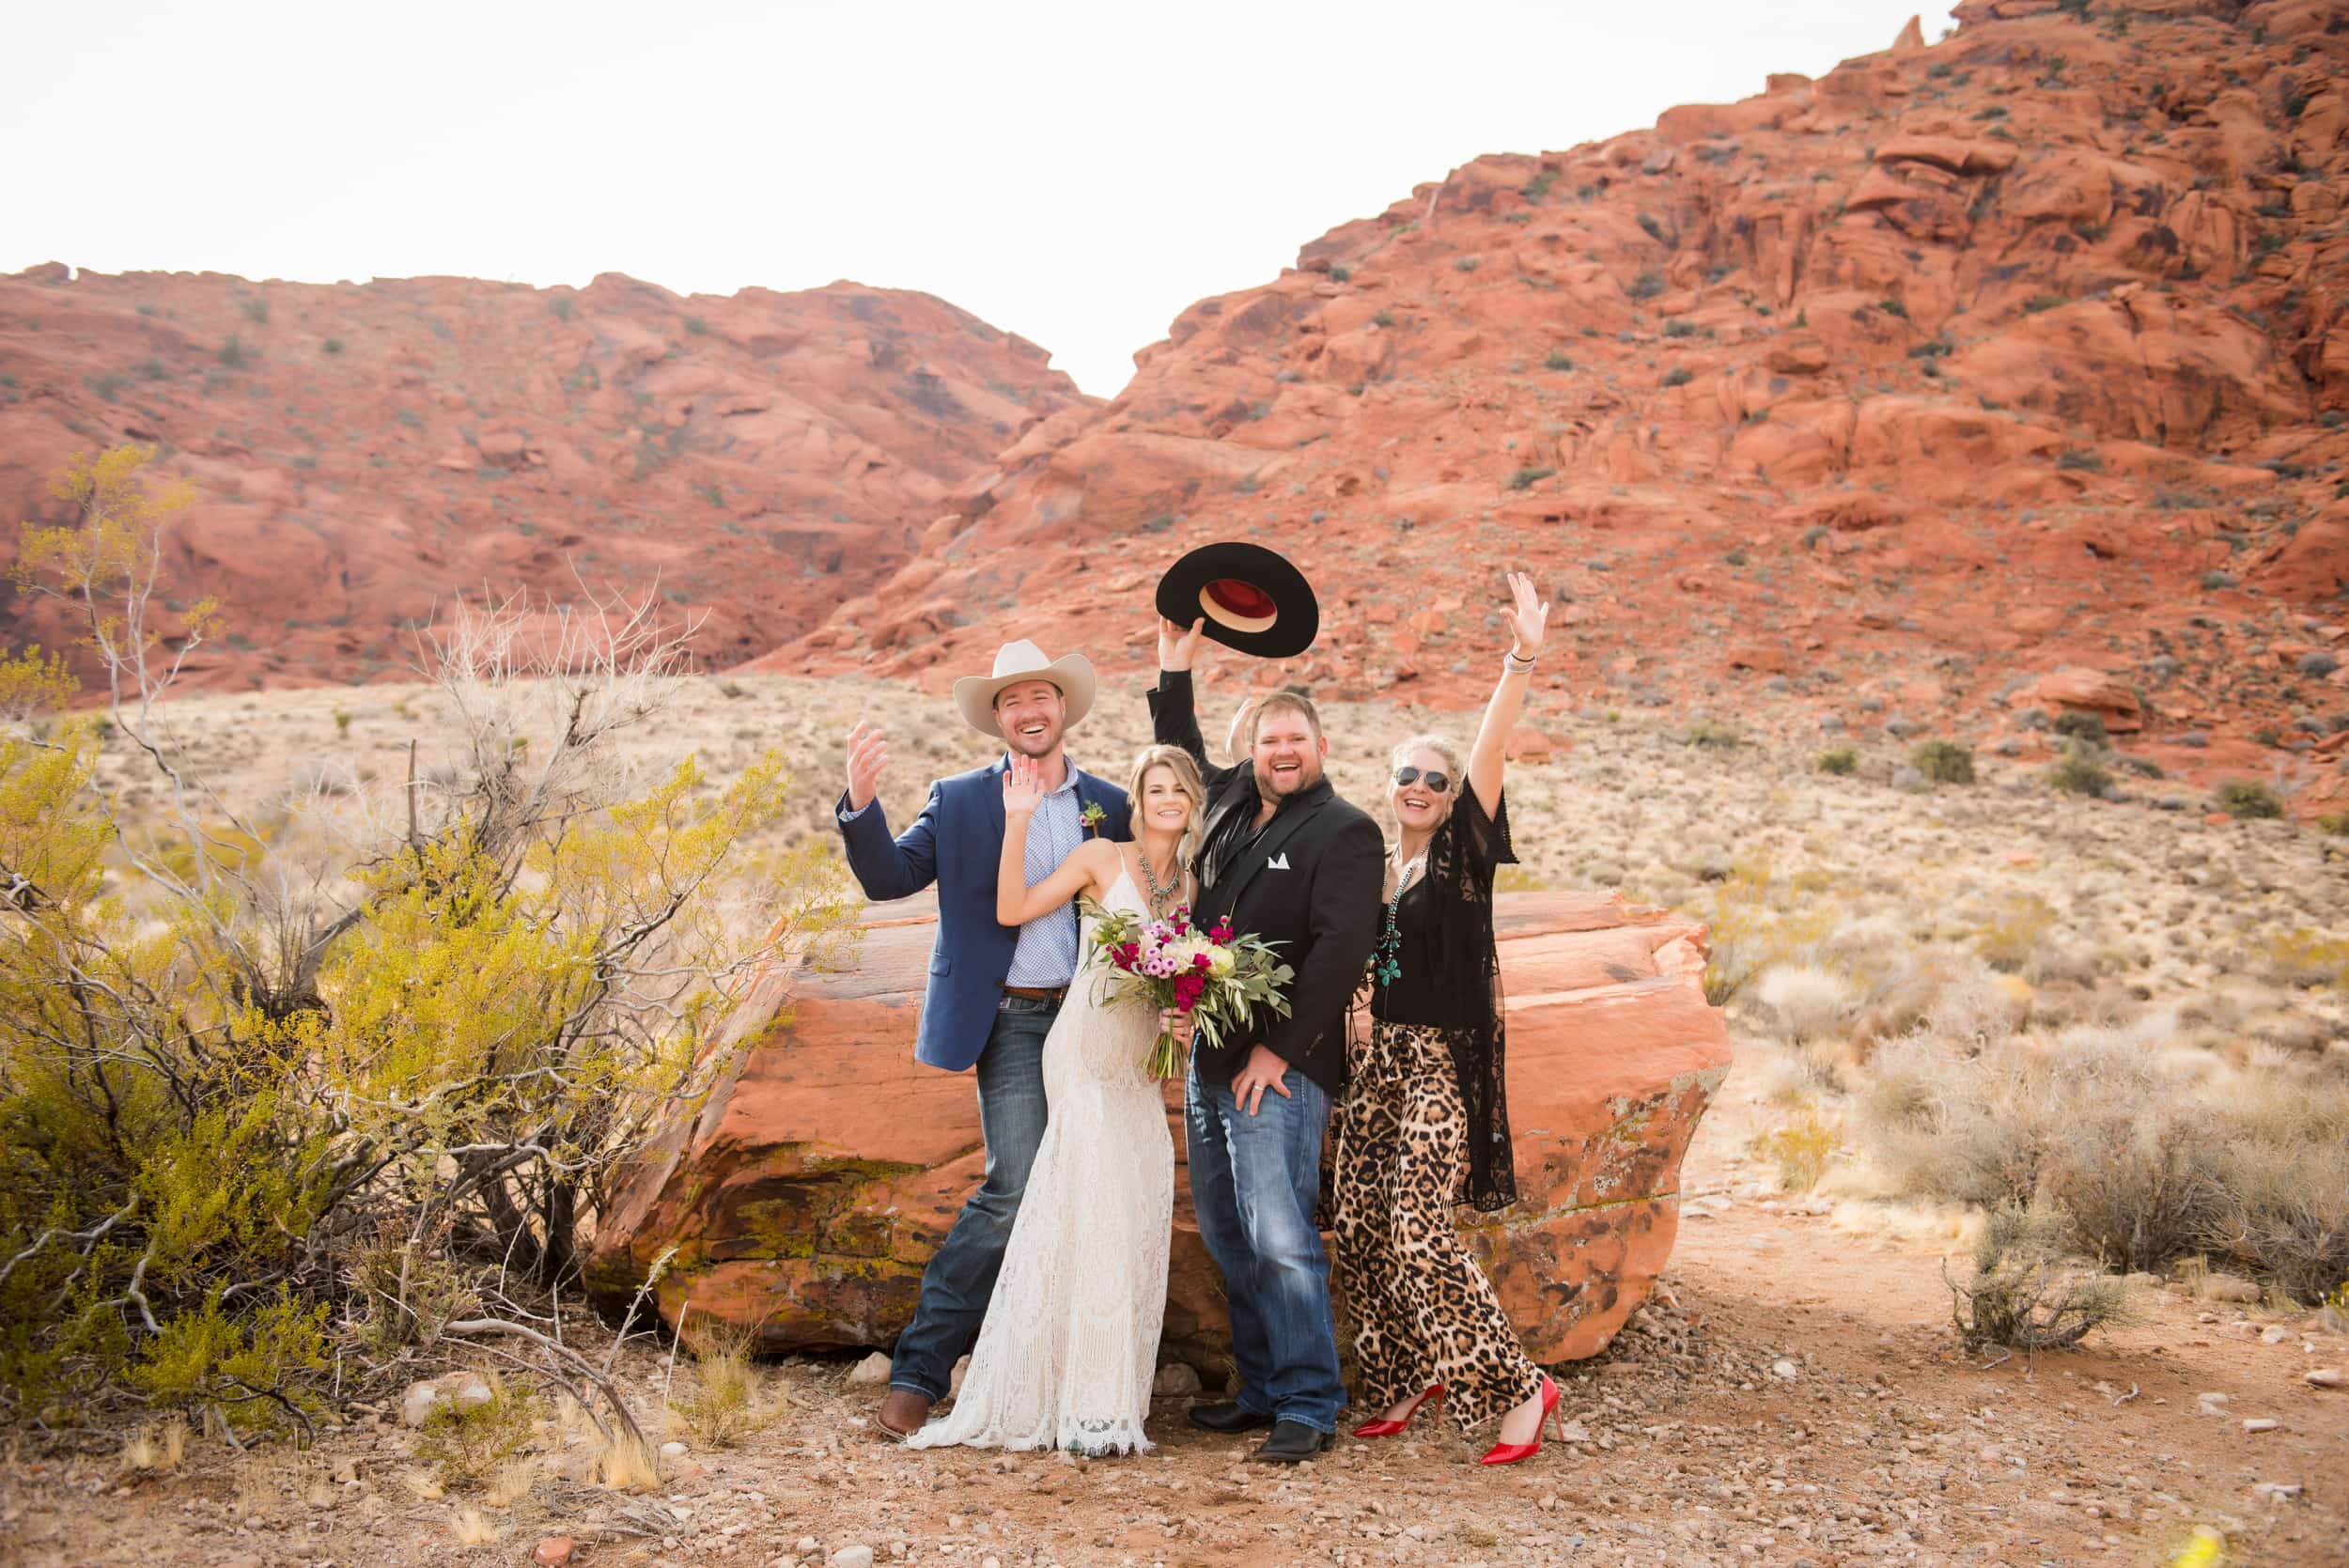 Group of four people in the desert with their arms raised at a western themed wedding